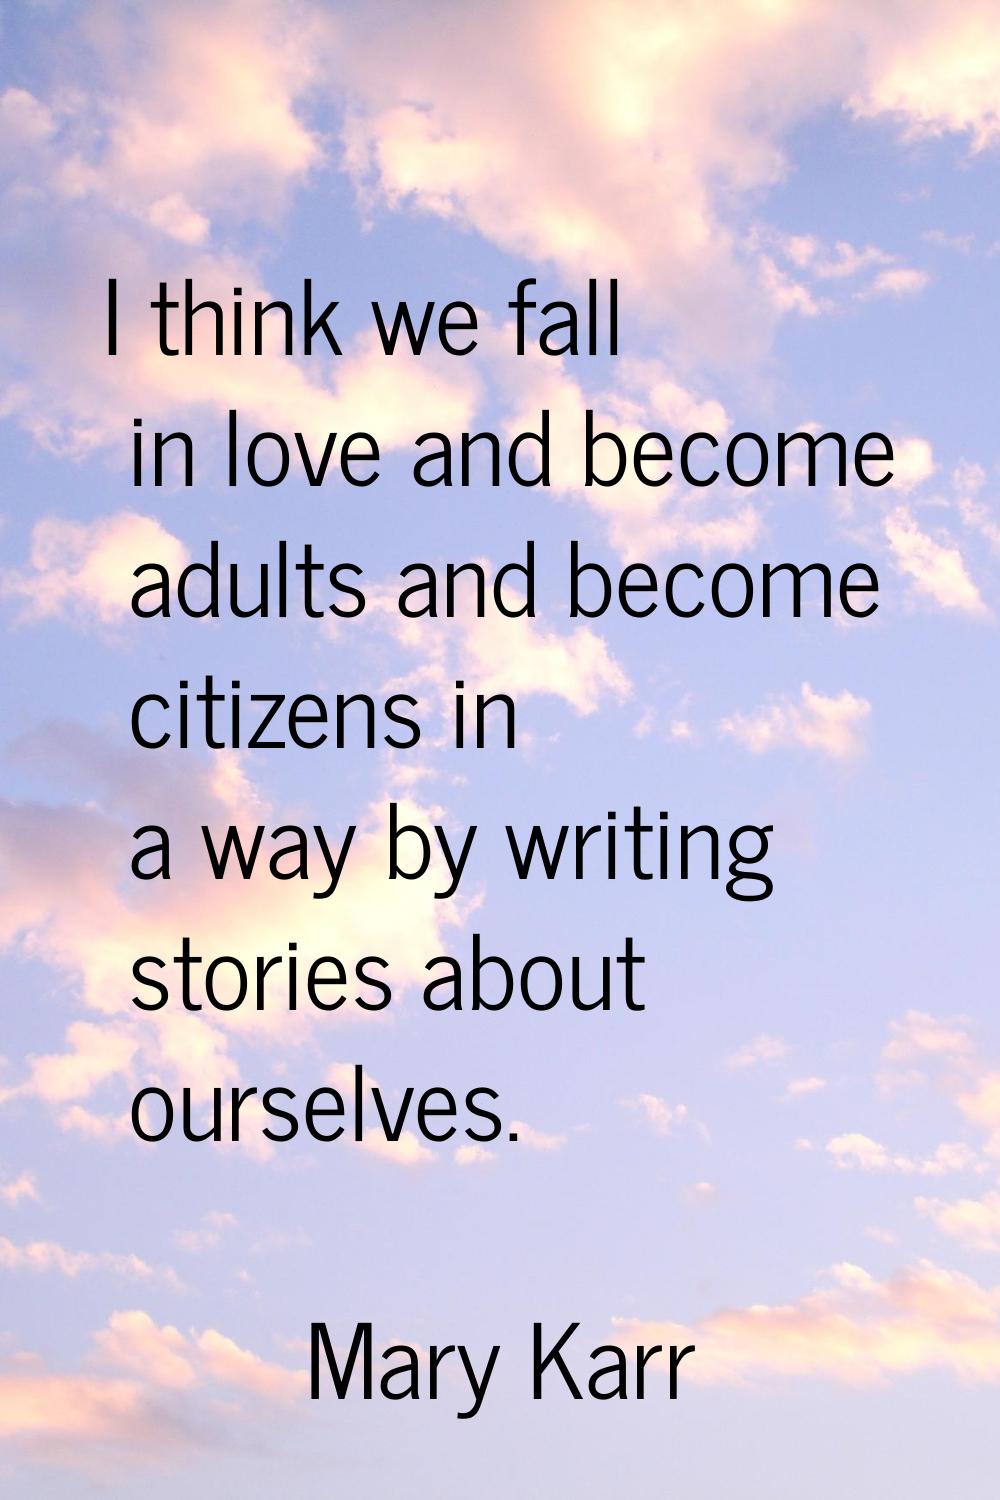 I think we fall in love and become adults and become citizens in a way by writing stories about our